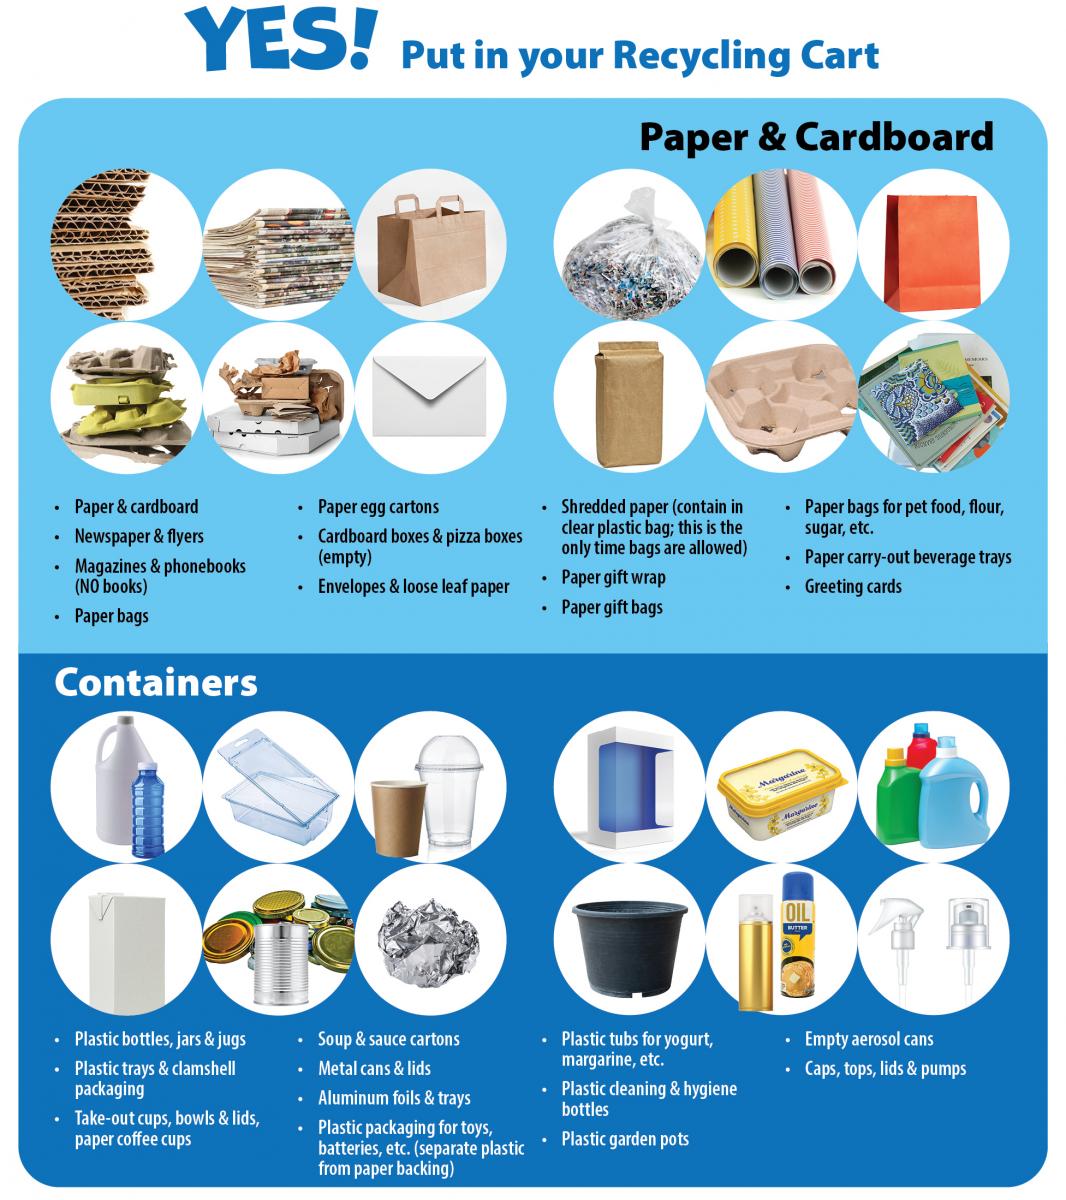 Put these items in Recycling